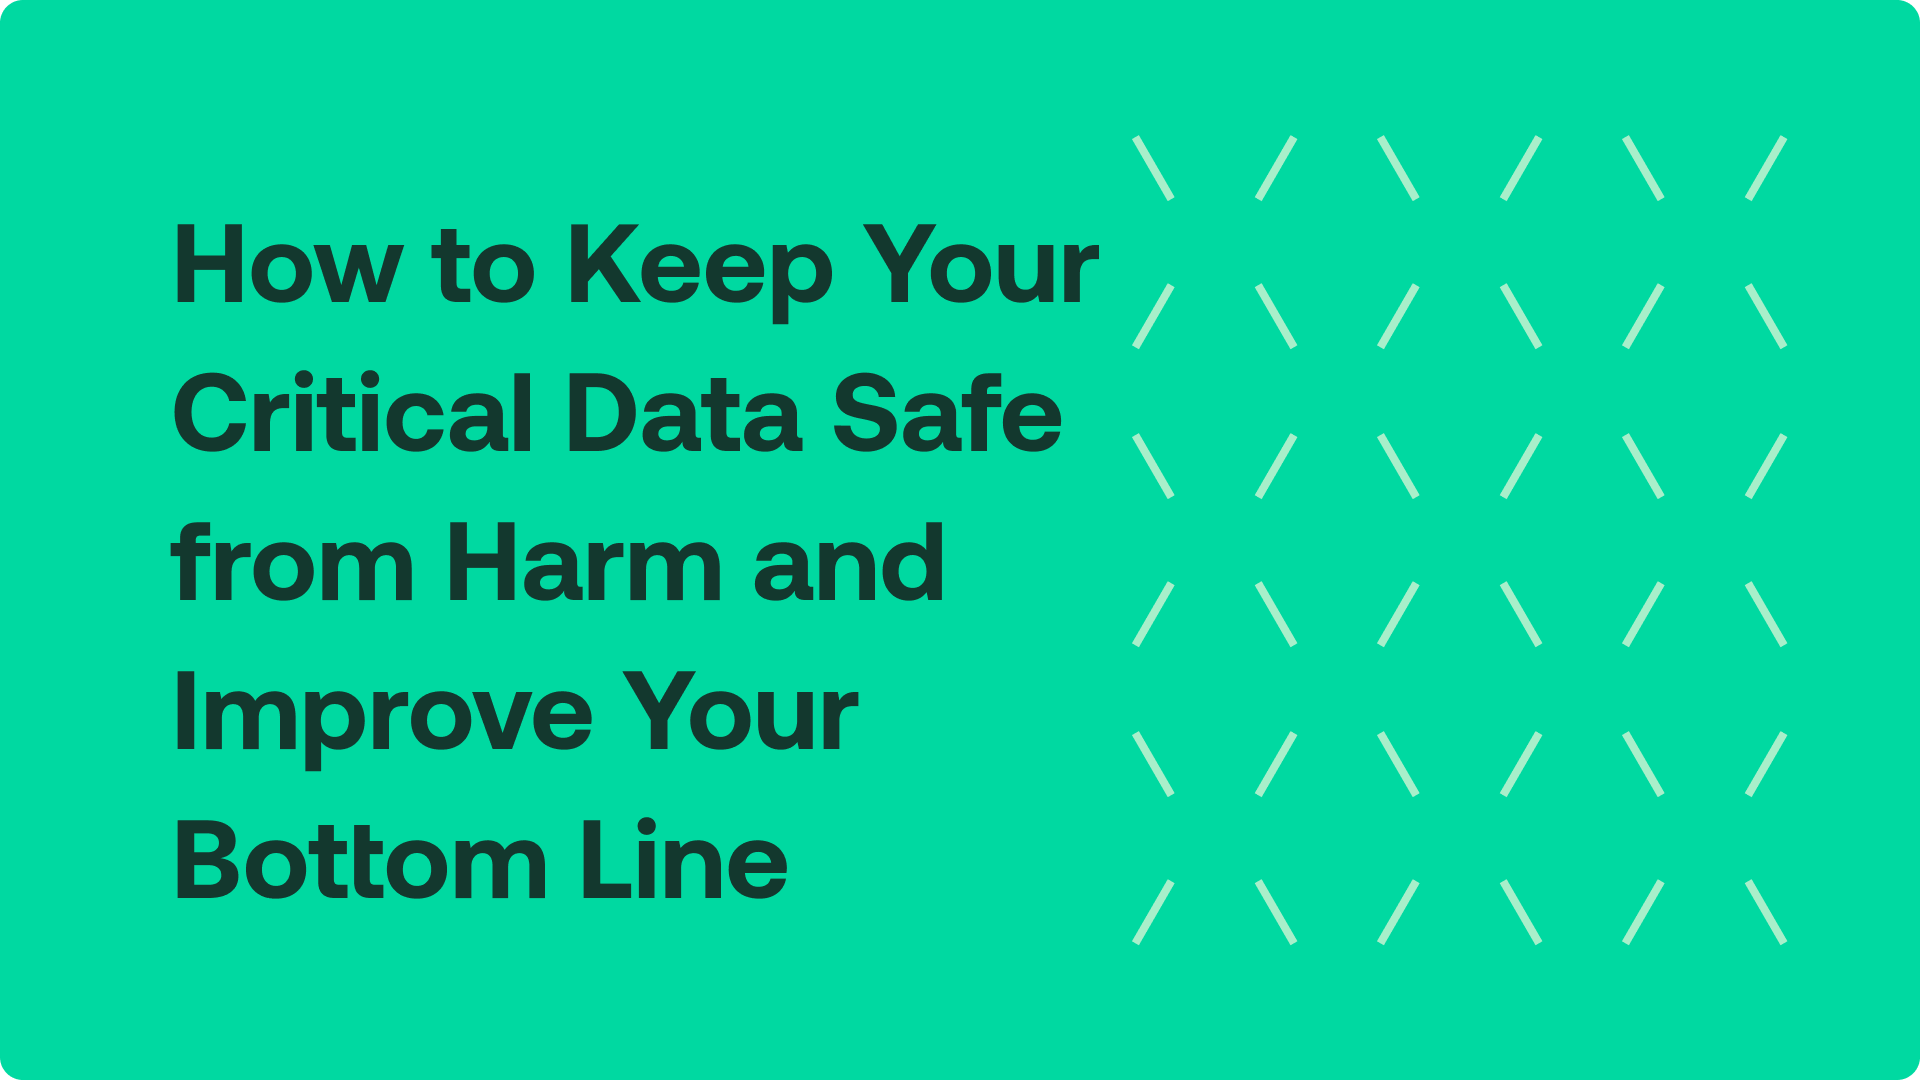 How to keep your critical data safe from harm and improve your bottom line